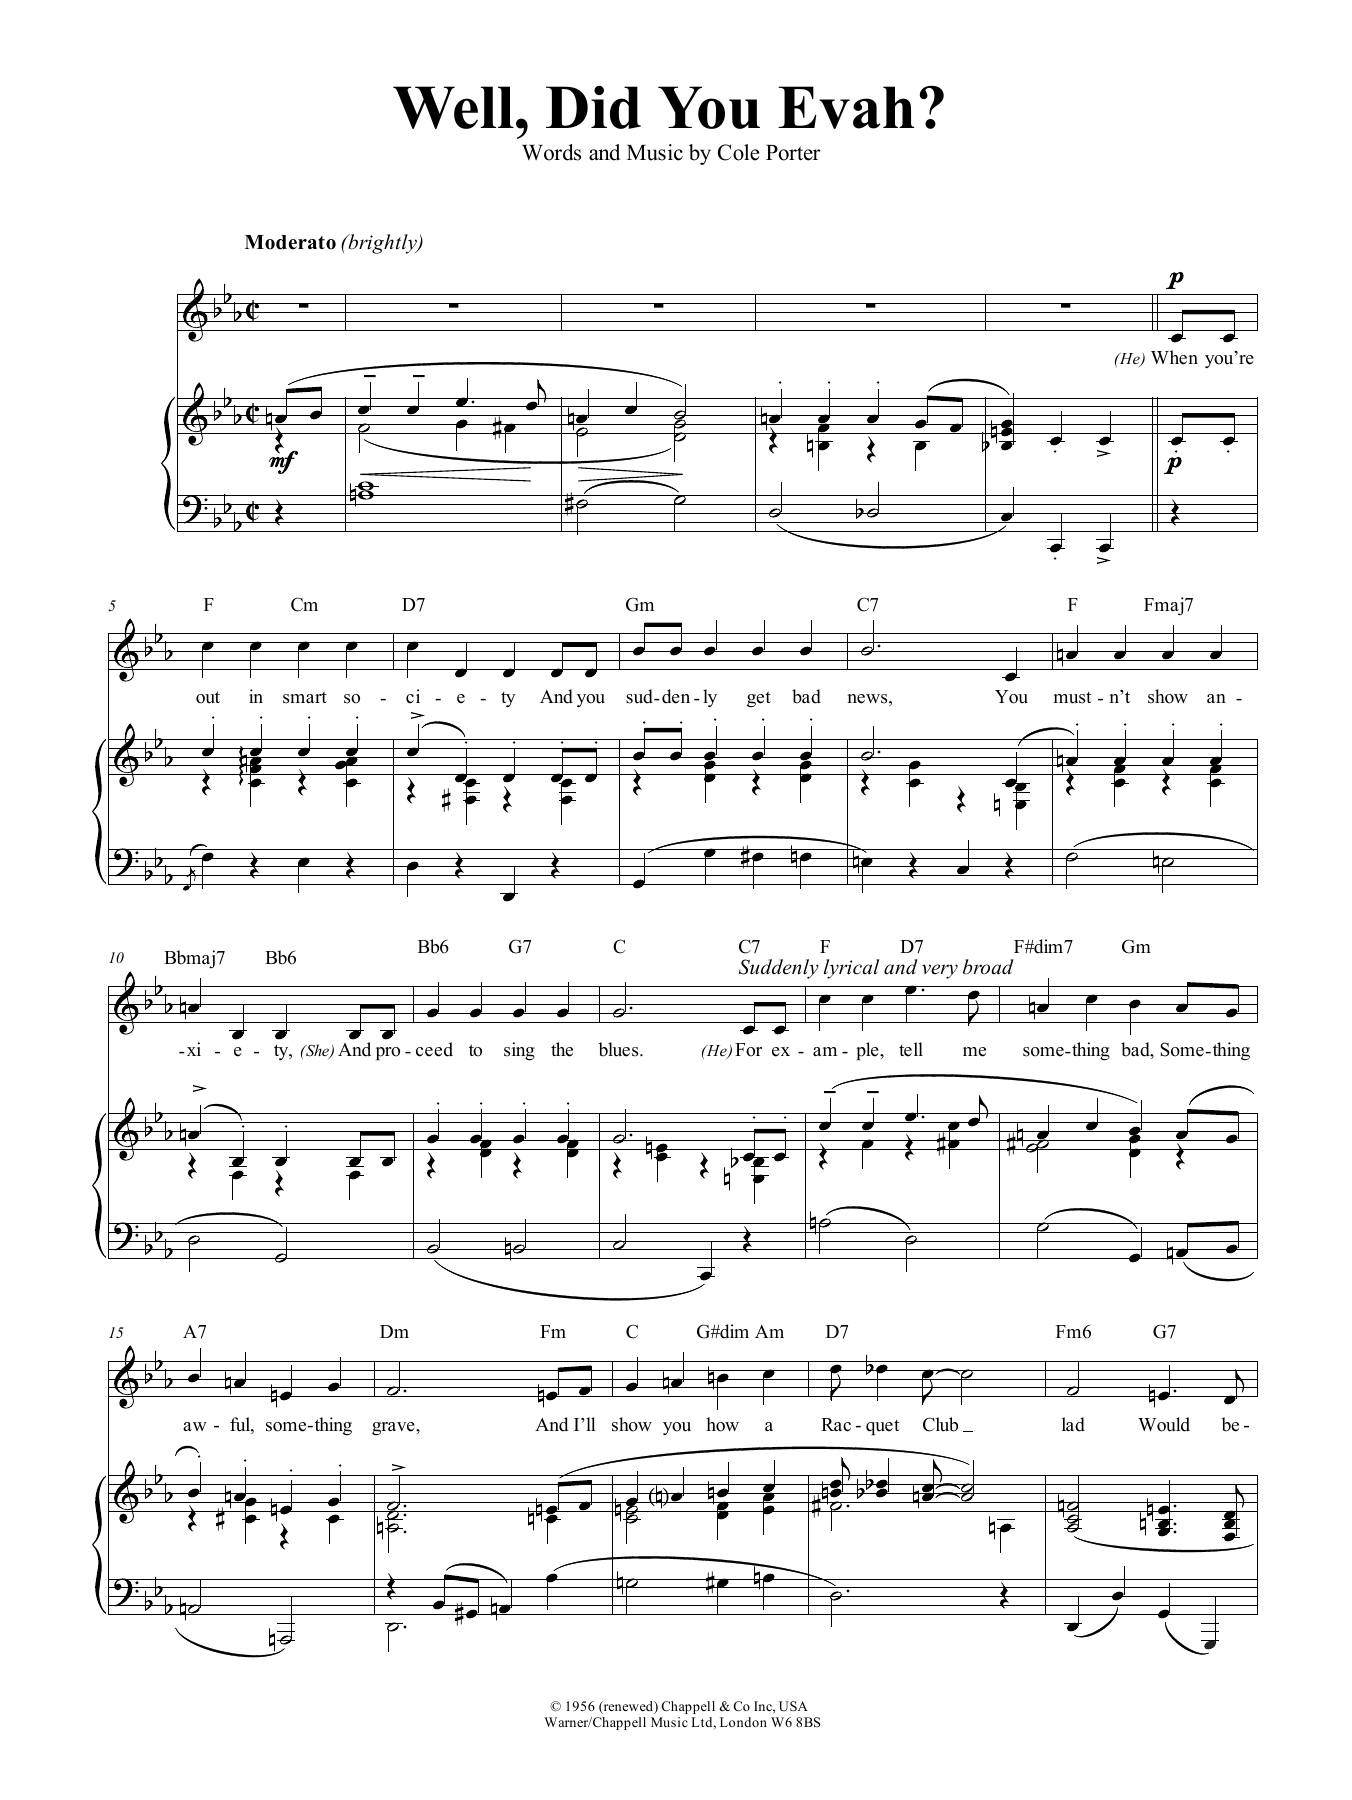 Download Cole Porter Well, Did You Evah Sheet Music